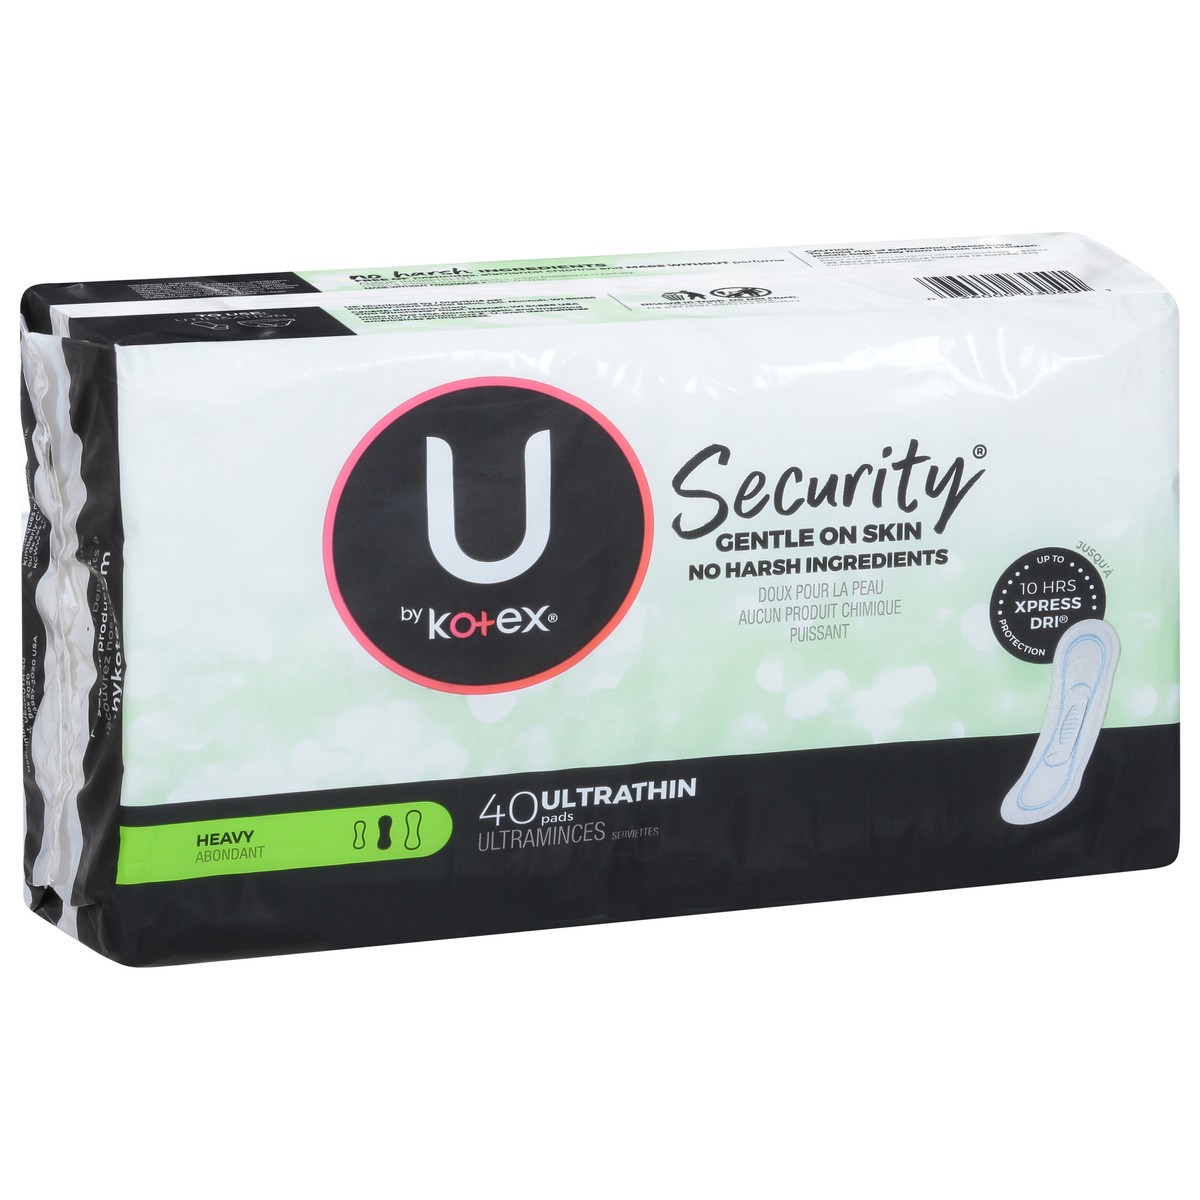 slide 13 of 16, U by Kotex Security Heavy Ultra Thin Pads 40 ea, 40 ct